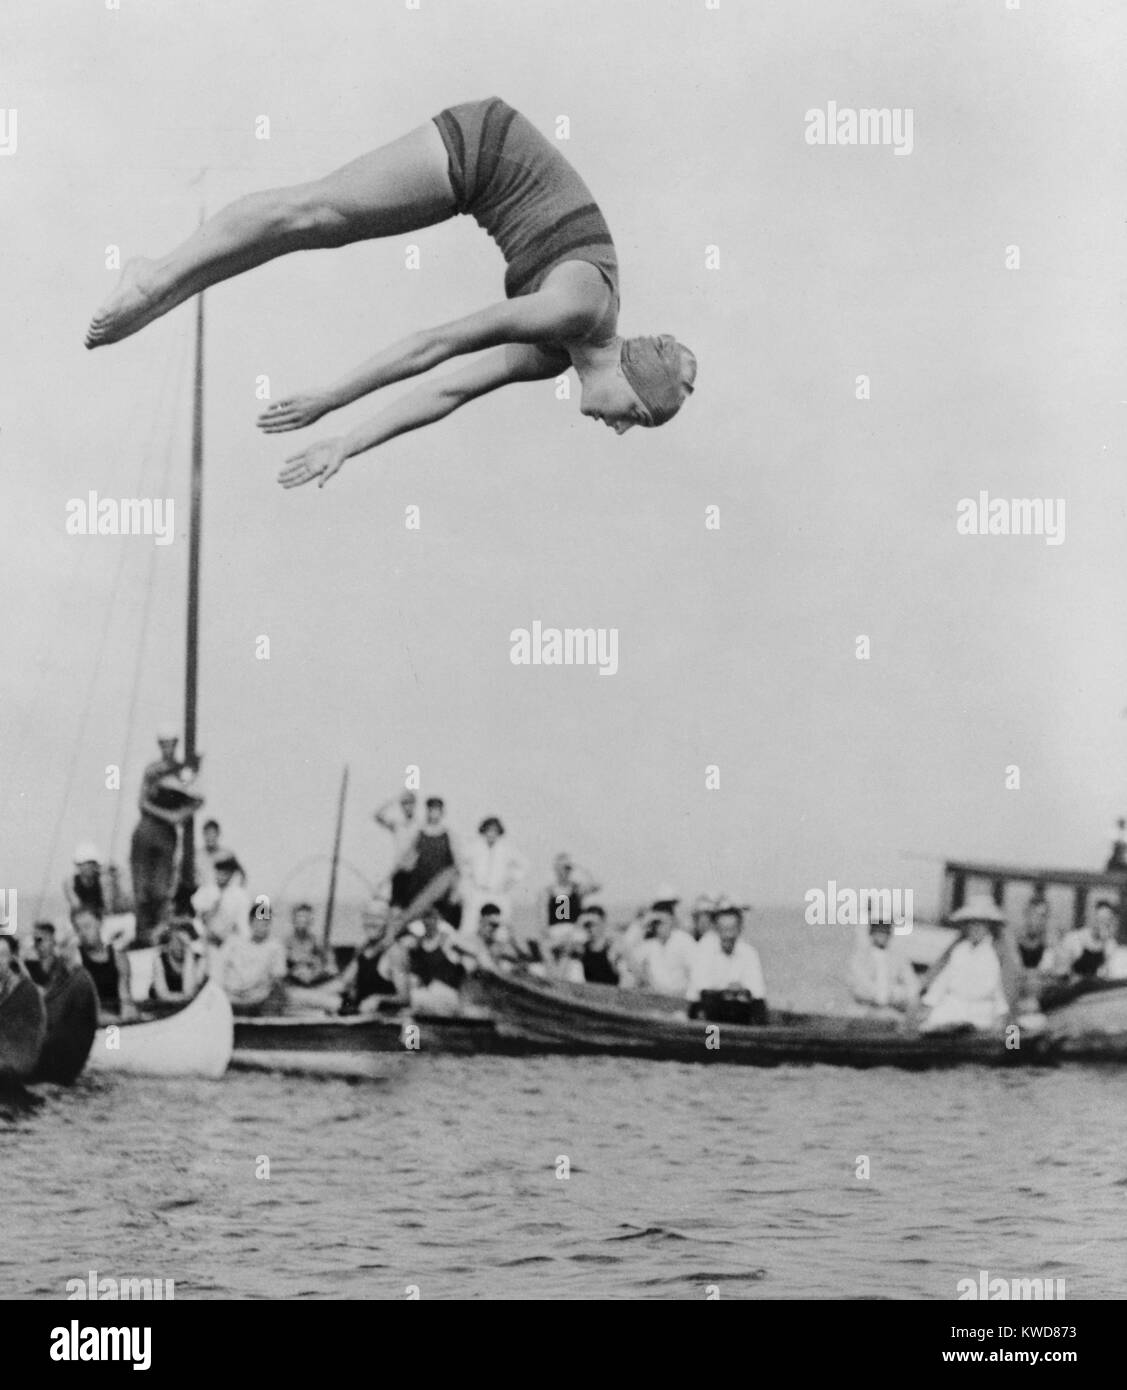 Aileen Riggin at aquatic carnival of the Huguenot Boat Club, New Rochelle, N.Y, 1922. She won the gold medal at the 1920 Olympics in women's springboard diving. (BSLOC 2015 17 135) Stock Photo